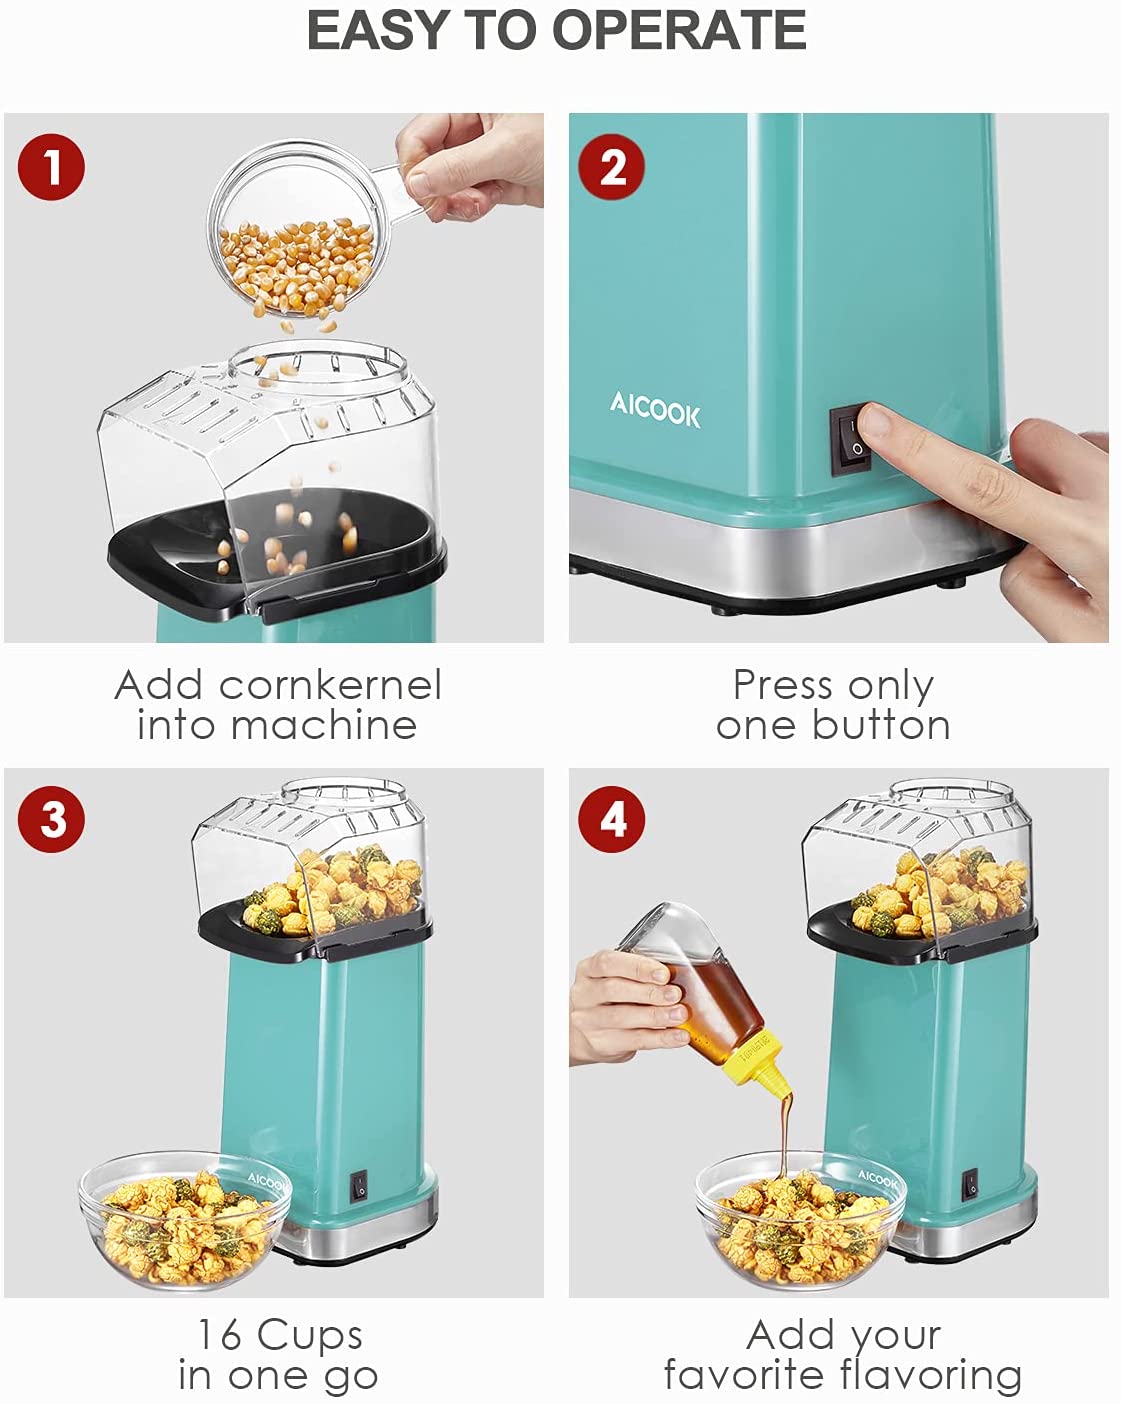 AICOOK | Hot Air Popcorn Popper, 16 Cups, 1400W, Home Popcorn Maker with Measuring Cup & Removable Lid, 3 Minutes Fast Healthy Oil-Free & BPA-Free, For Christmas, Movie Night or Party, Aqua & Red